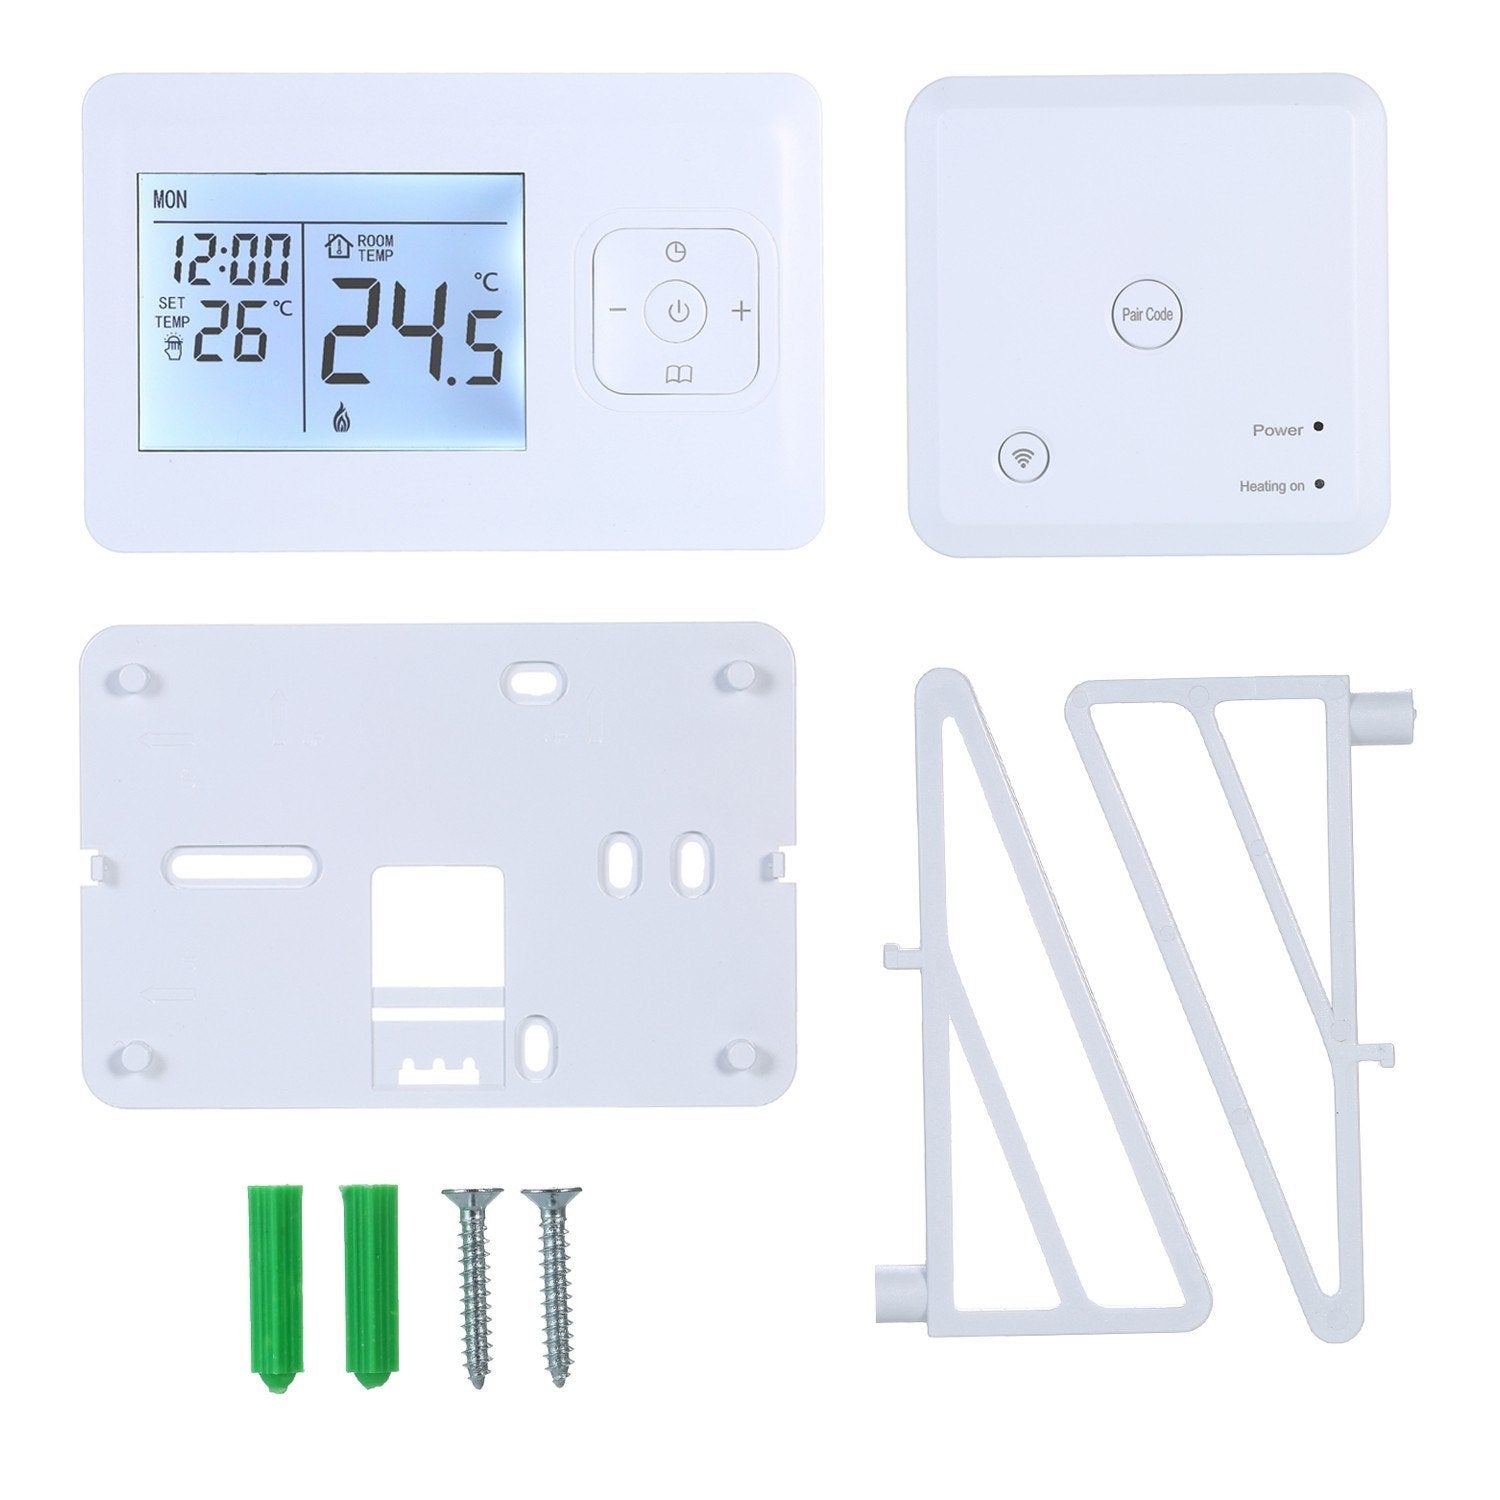 LCD Digital Heating Thermostat Programmable Wall-mounted Furnace Wifi